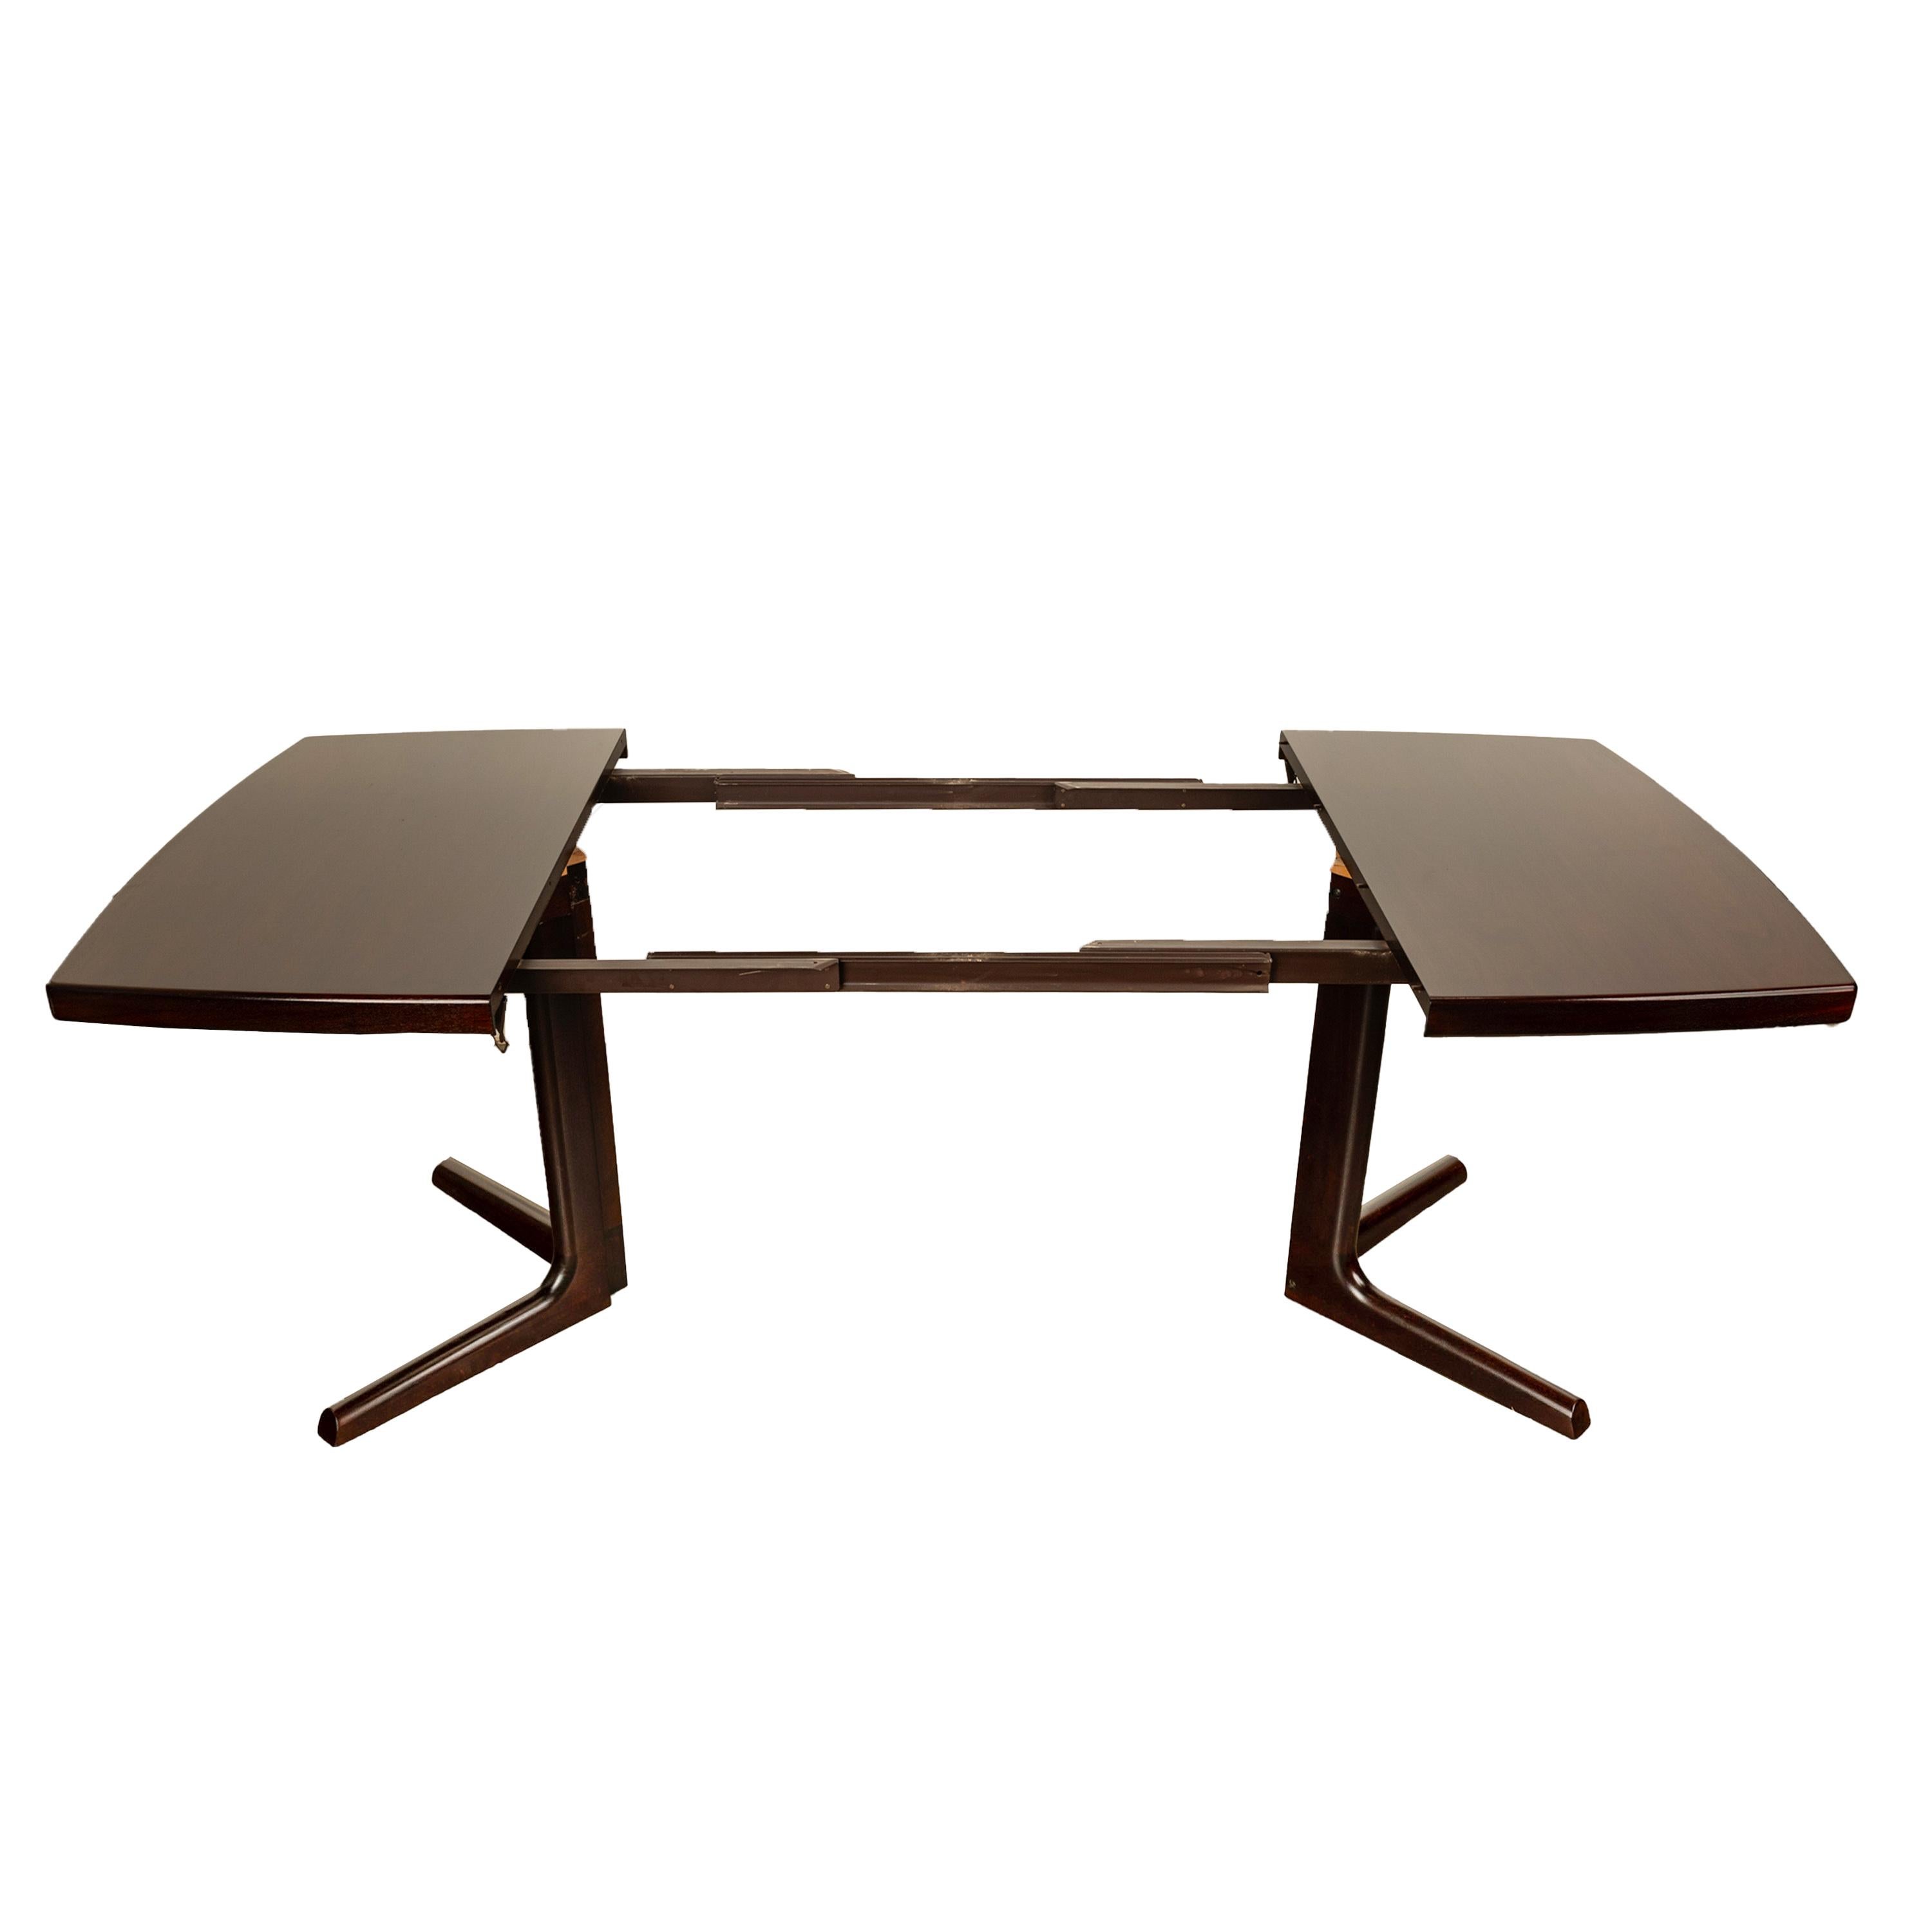 Mid Century Modern Danish Rosewood Dining Table Seats 8-10 Farstrup Mobler 1965 For Sale 7